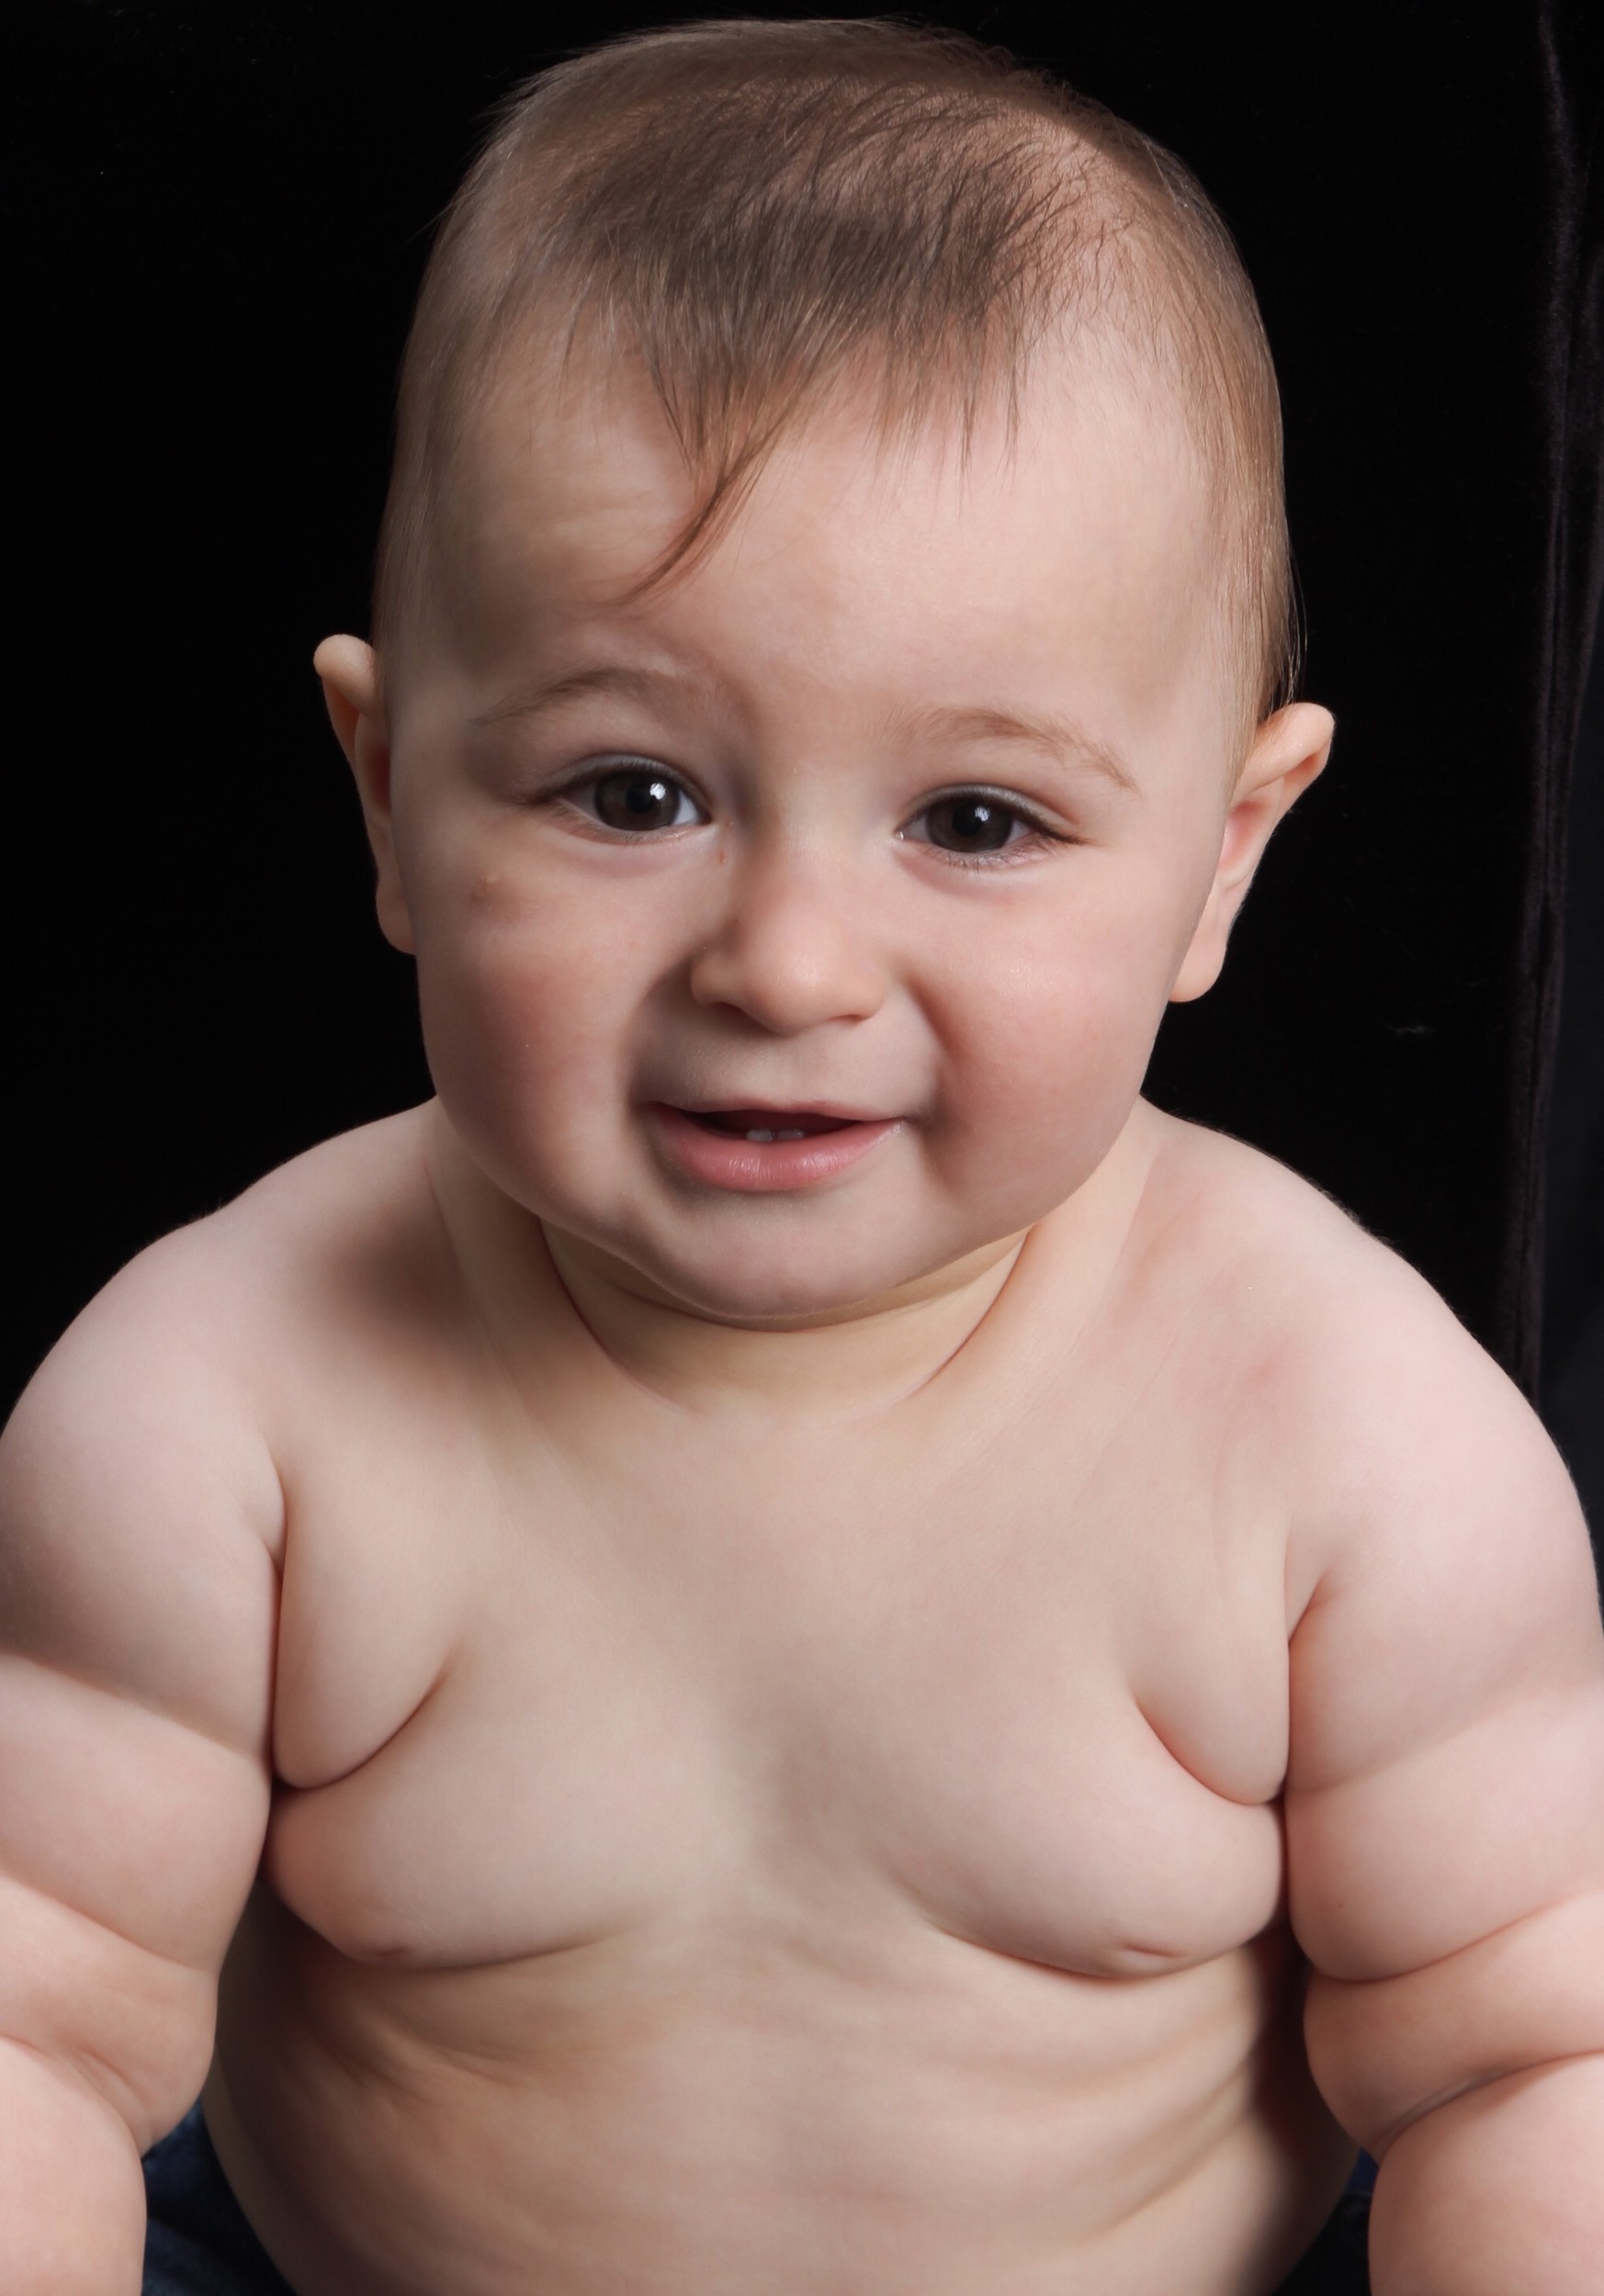 Aaron Fried, 1, has been affectionately nicknamed “the Michelin Baby” by his parents due to the healthy weight he has gained from breastfeeding.